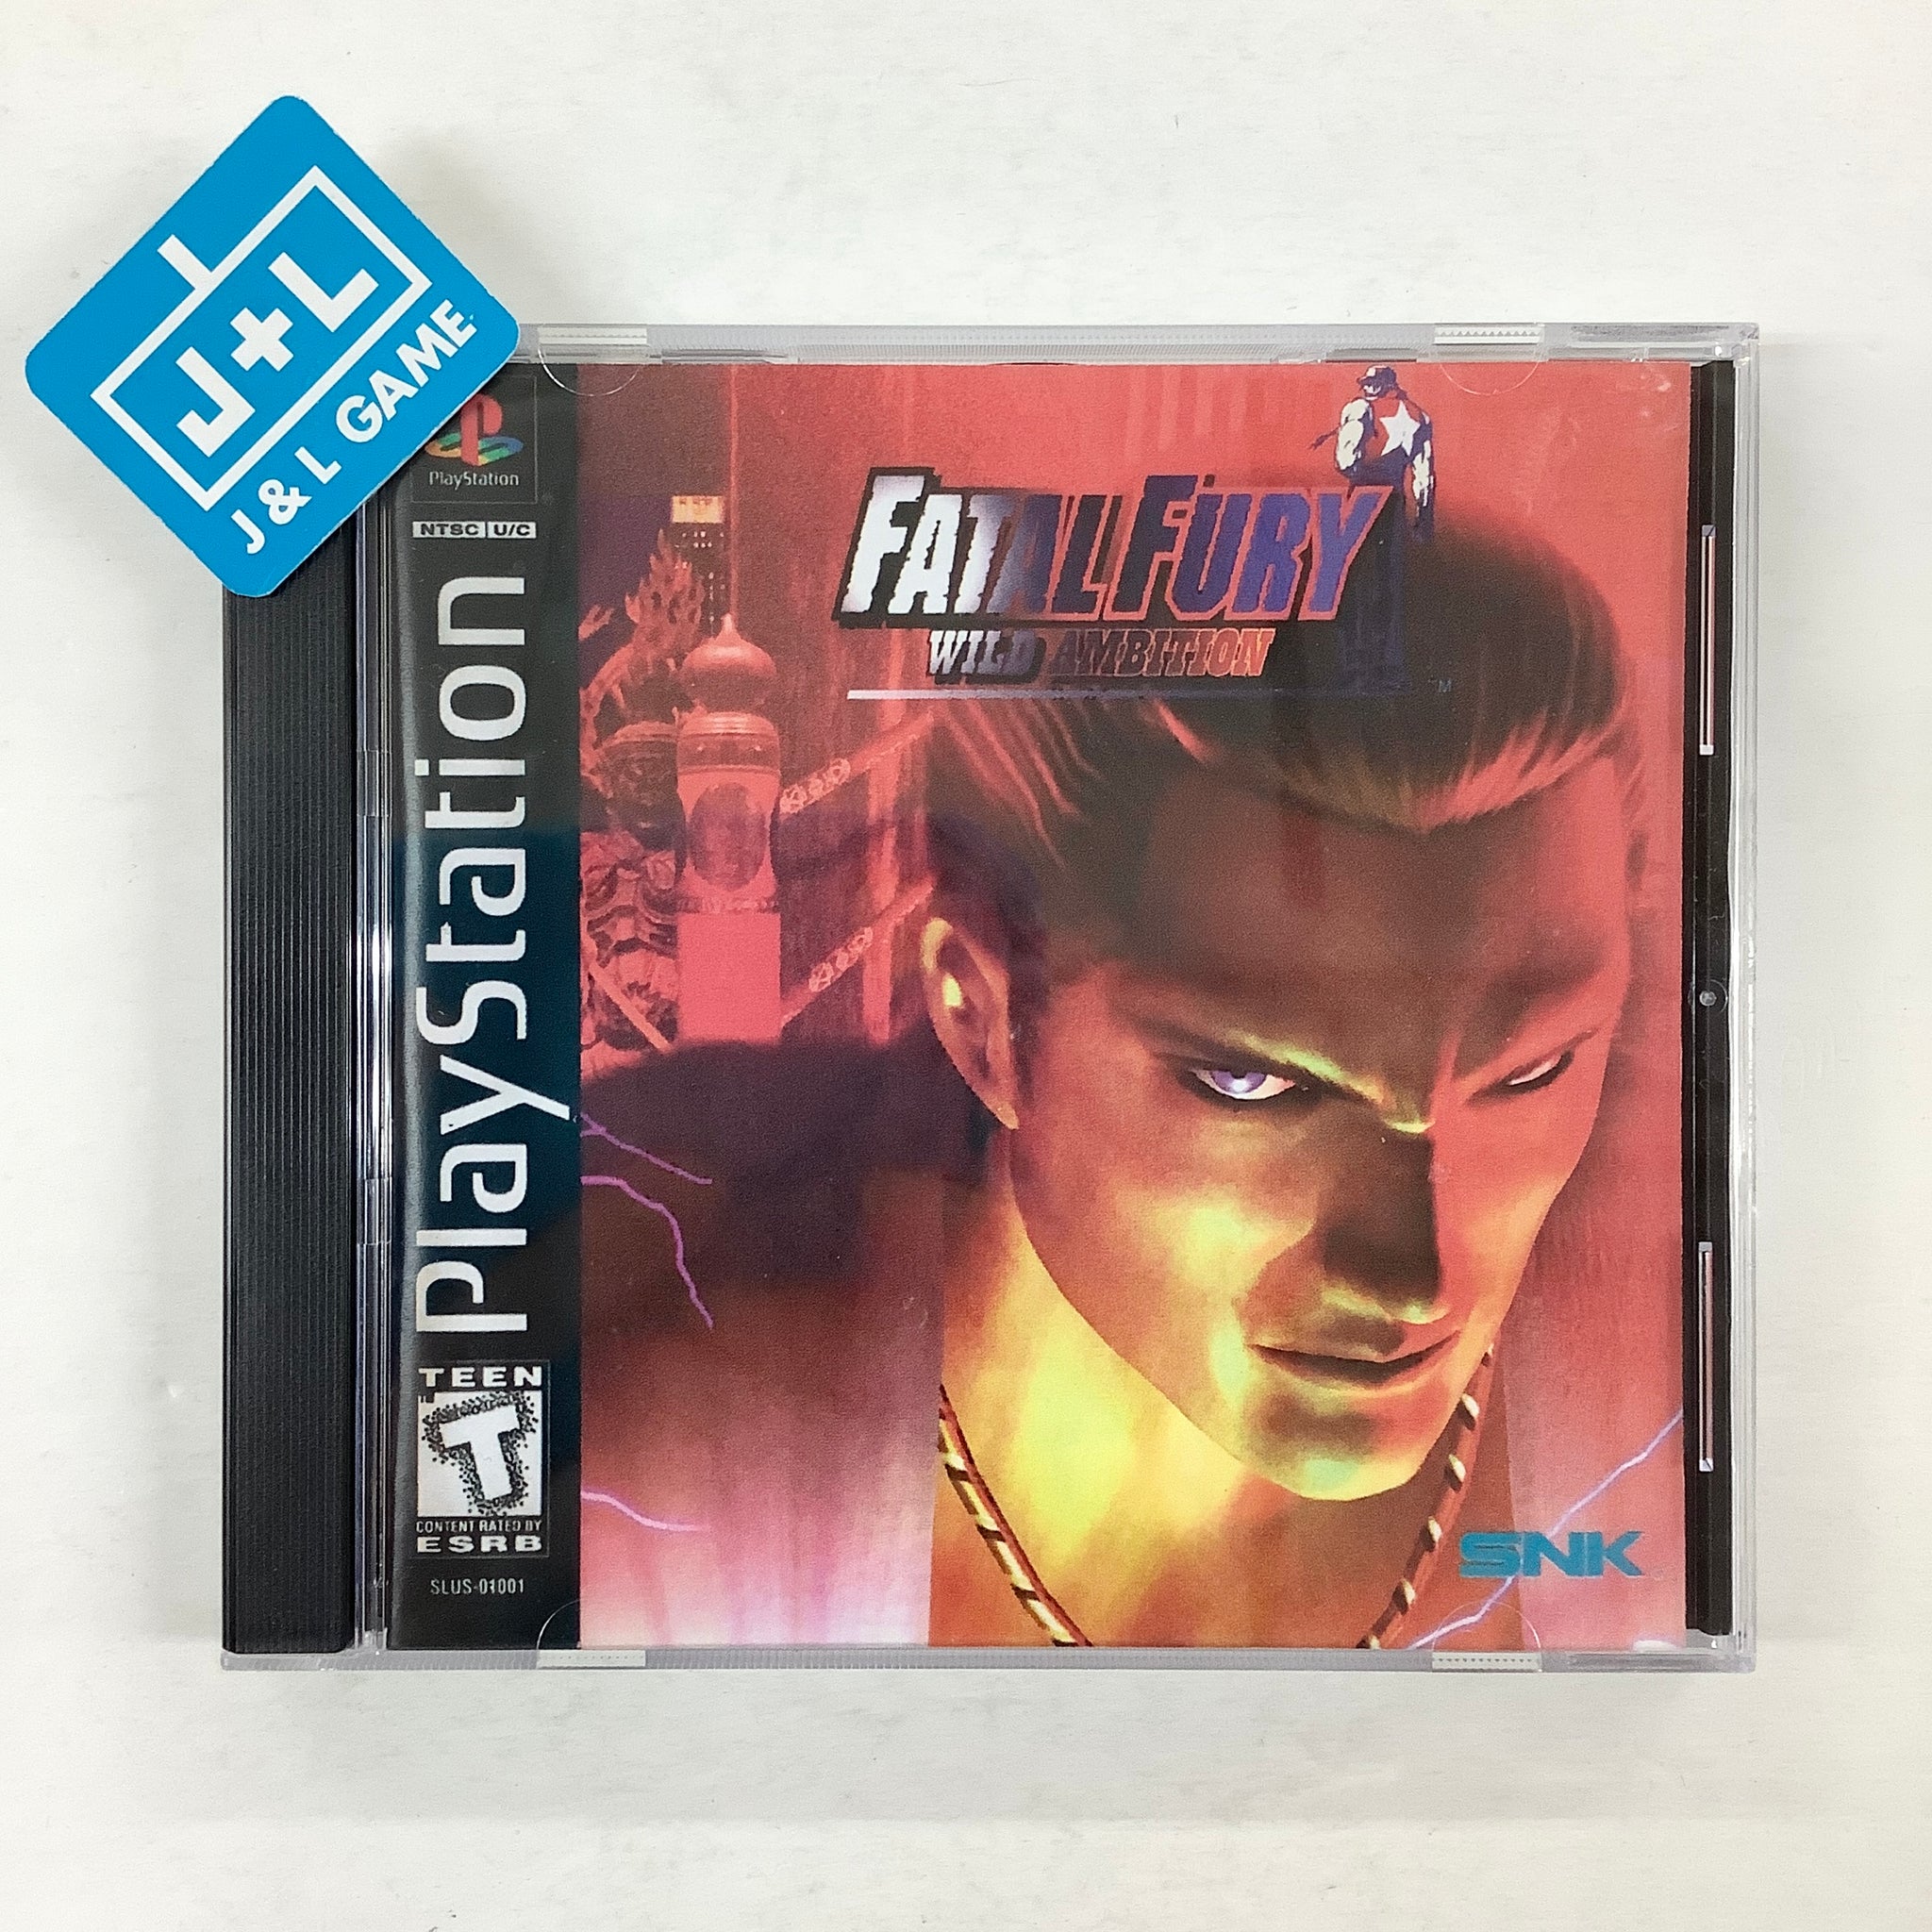 Fatal Fury: Wild Ambition, Arcade Video game by SNK Corp. (1999)